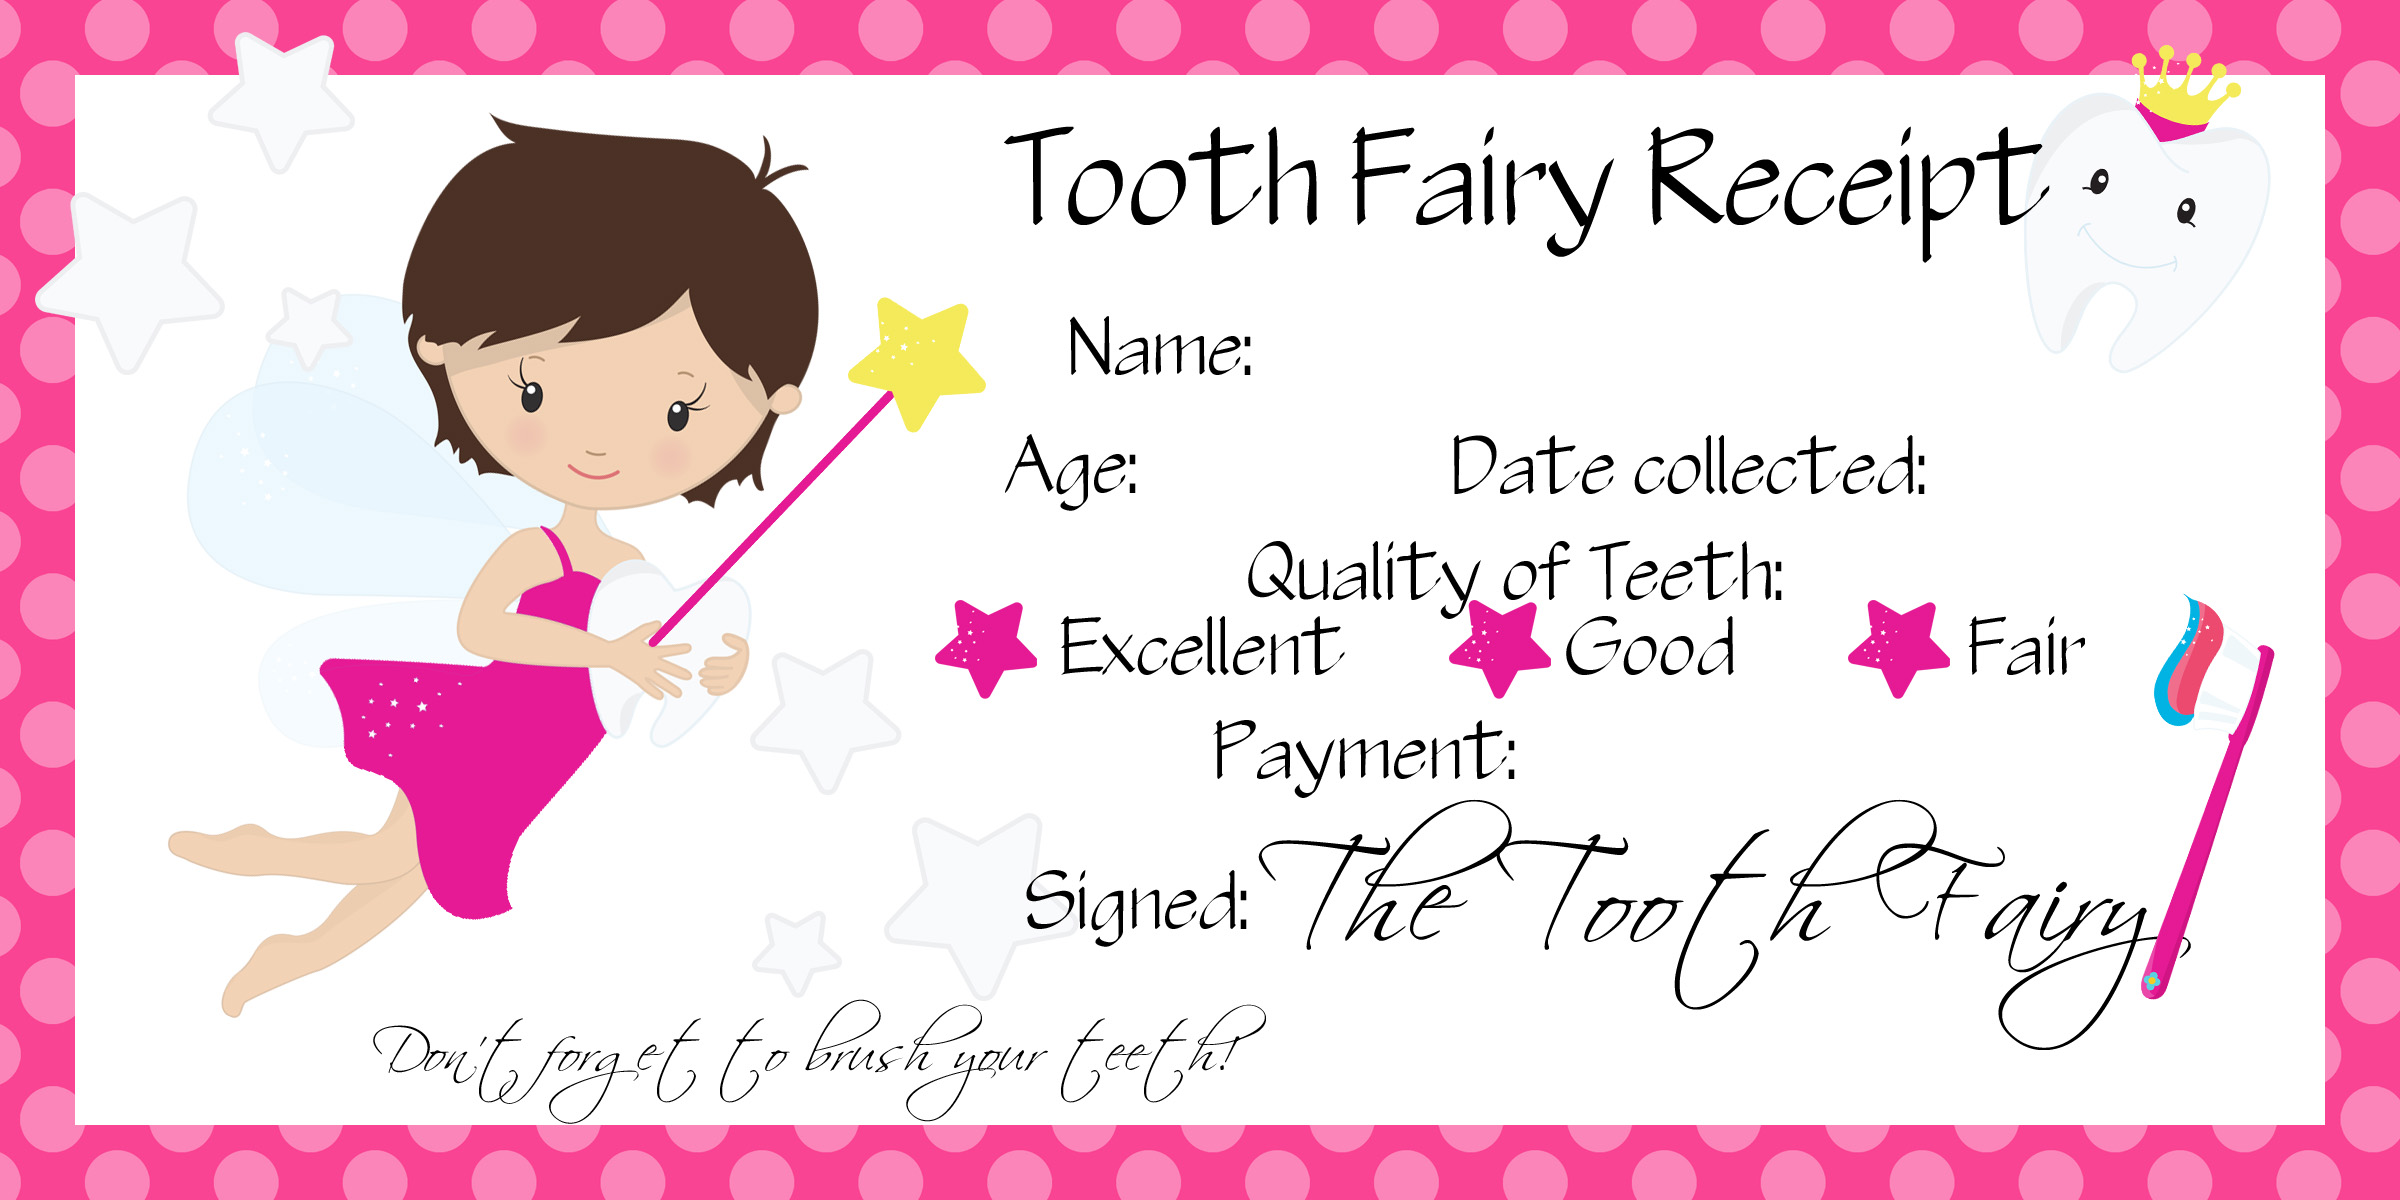 O's first lost tooth Tooth Fairy Receipt Free printable • jeni ro designs